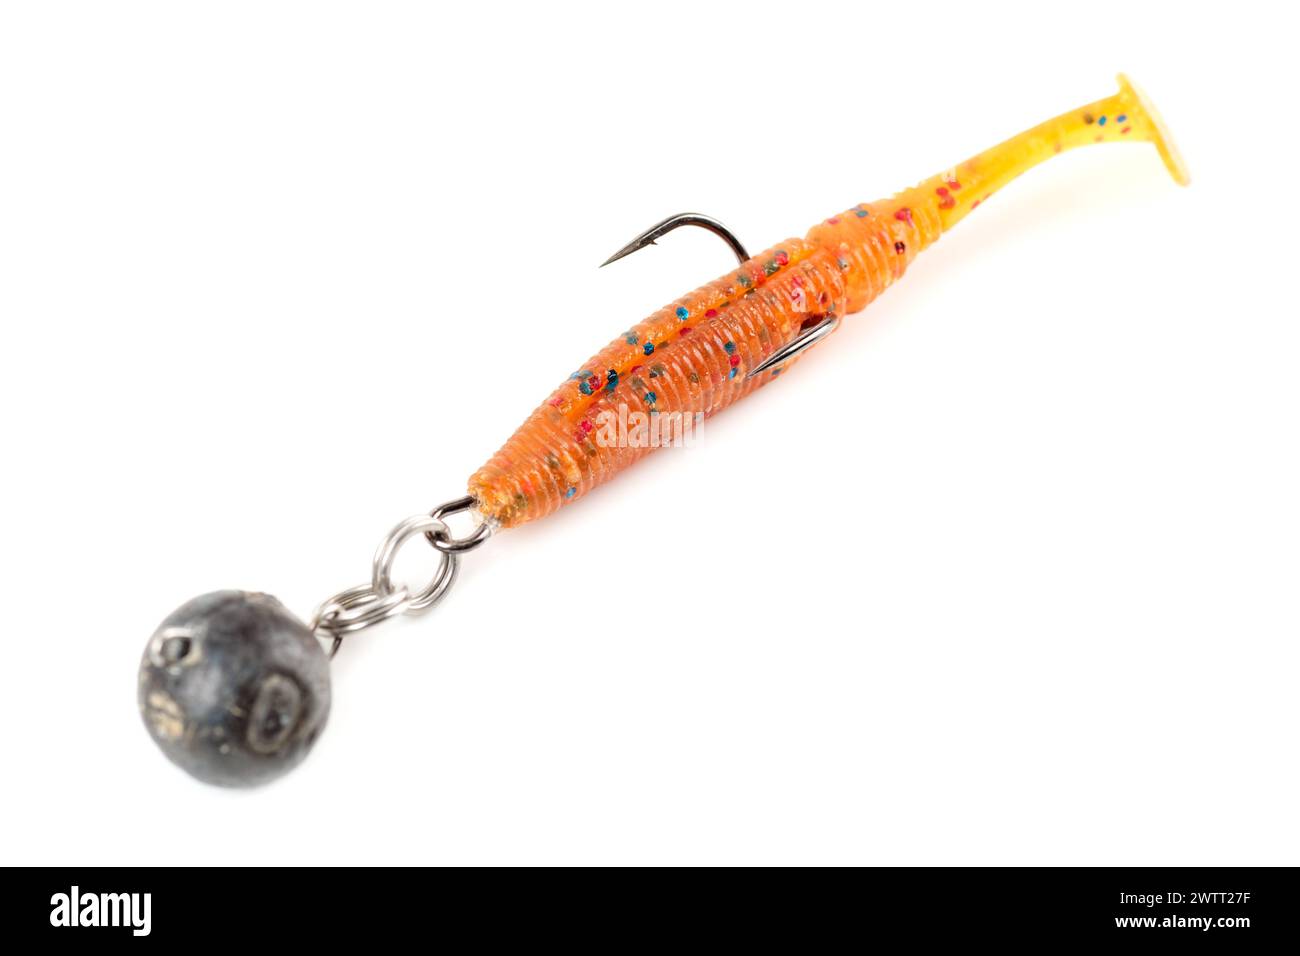 Orange fishing lure, plastic shad fish, with double hook and lead sinker, isolated on white background Stock Photo